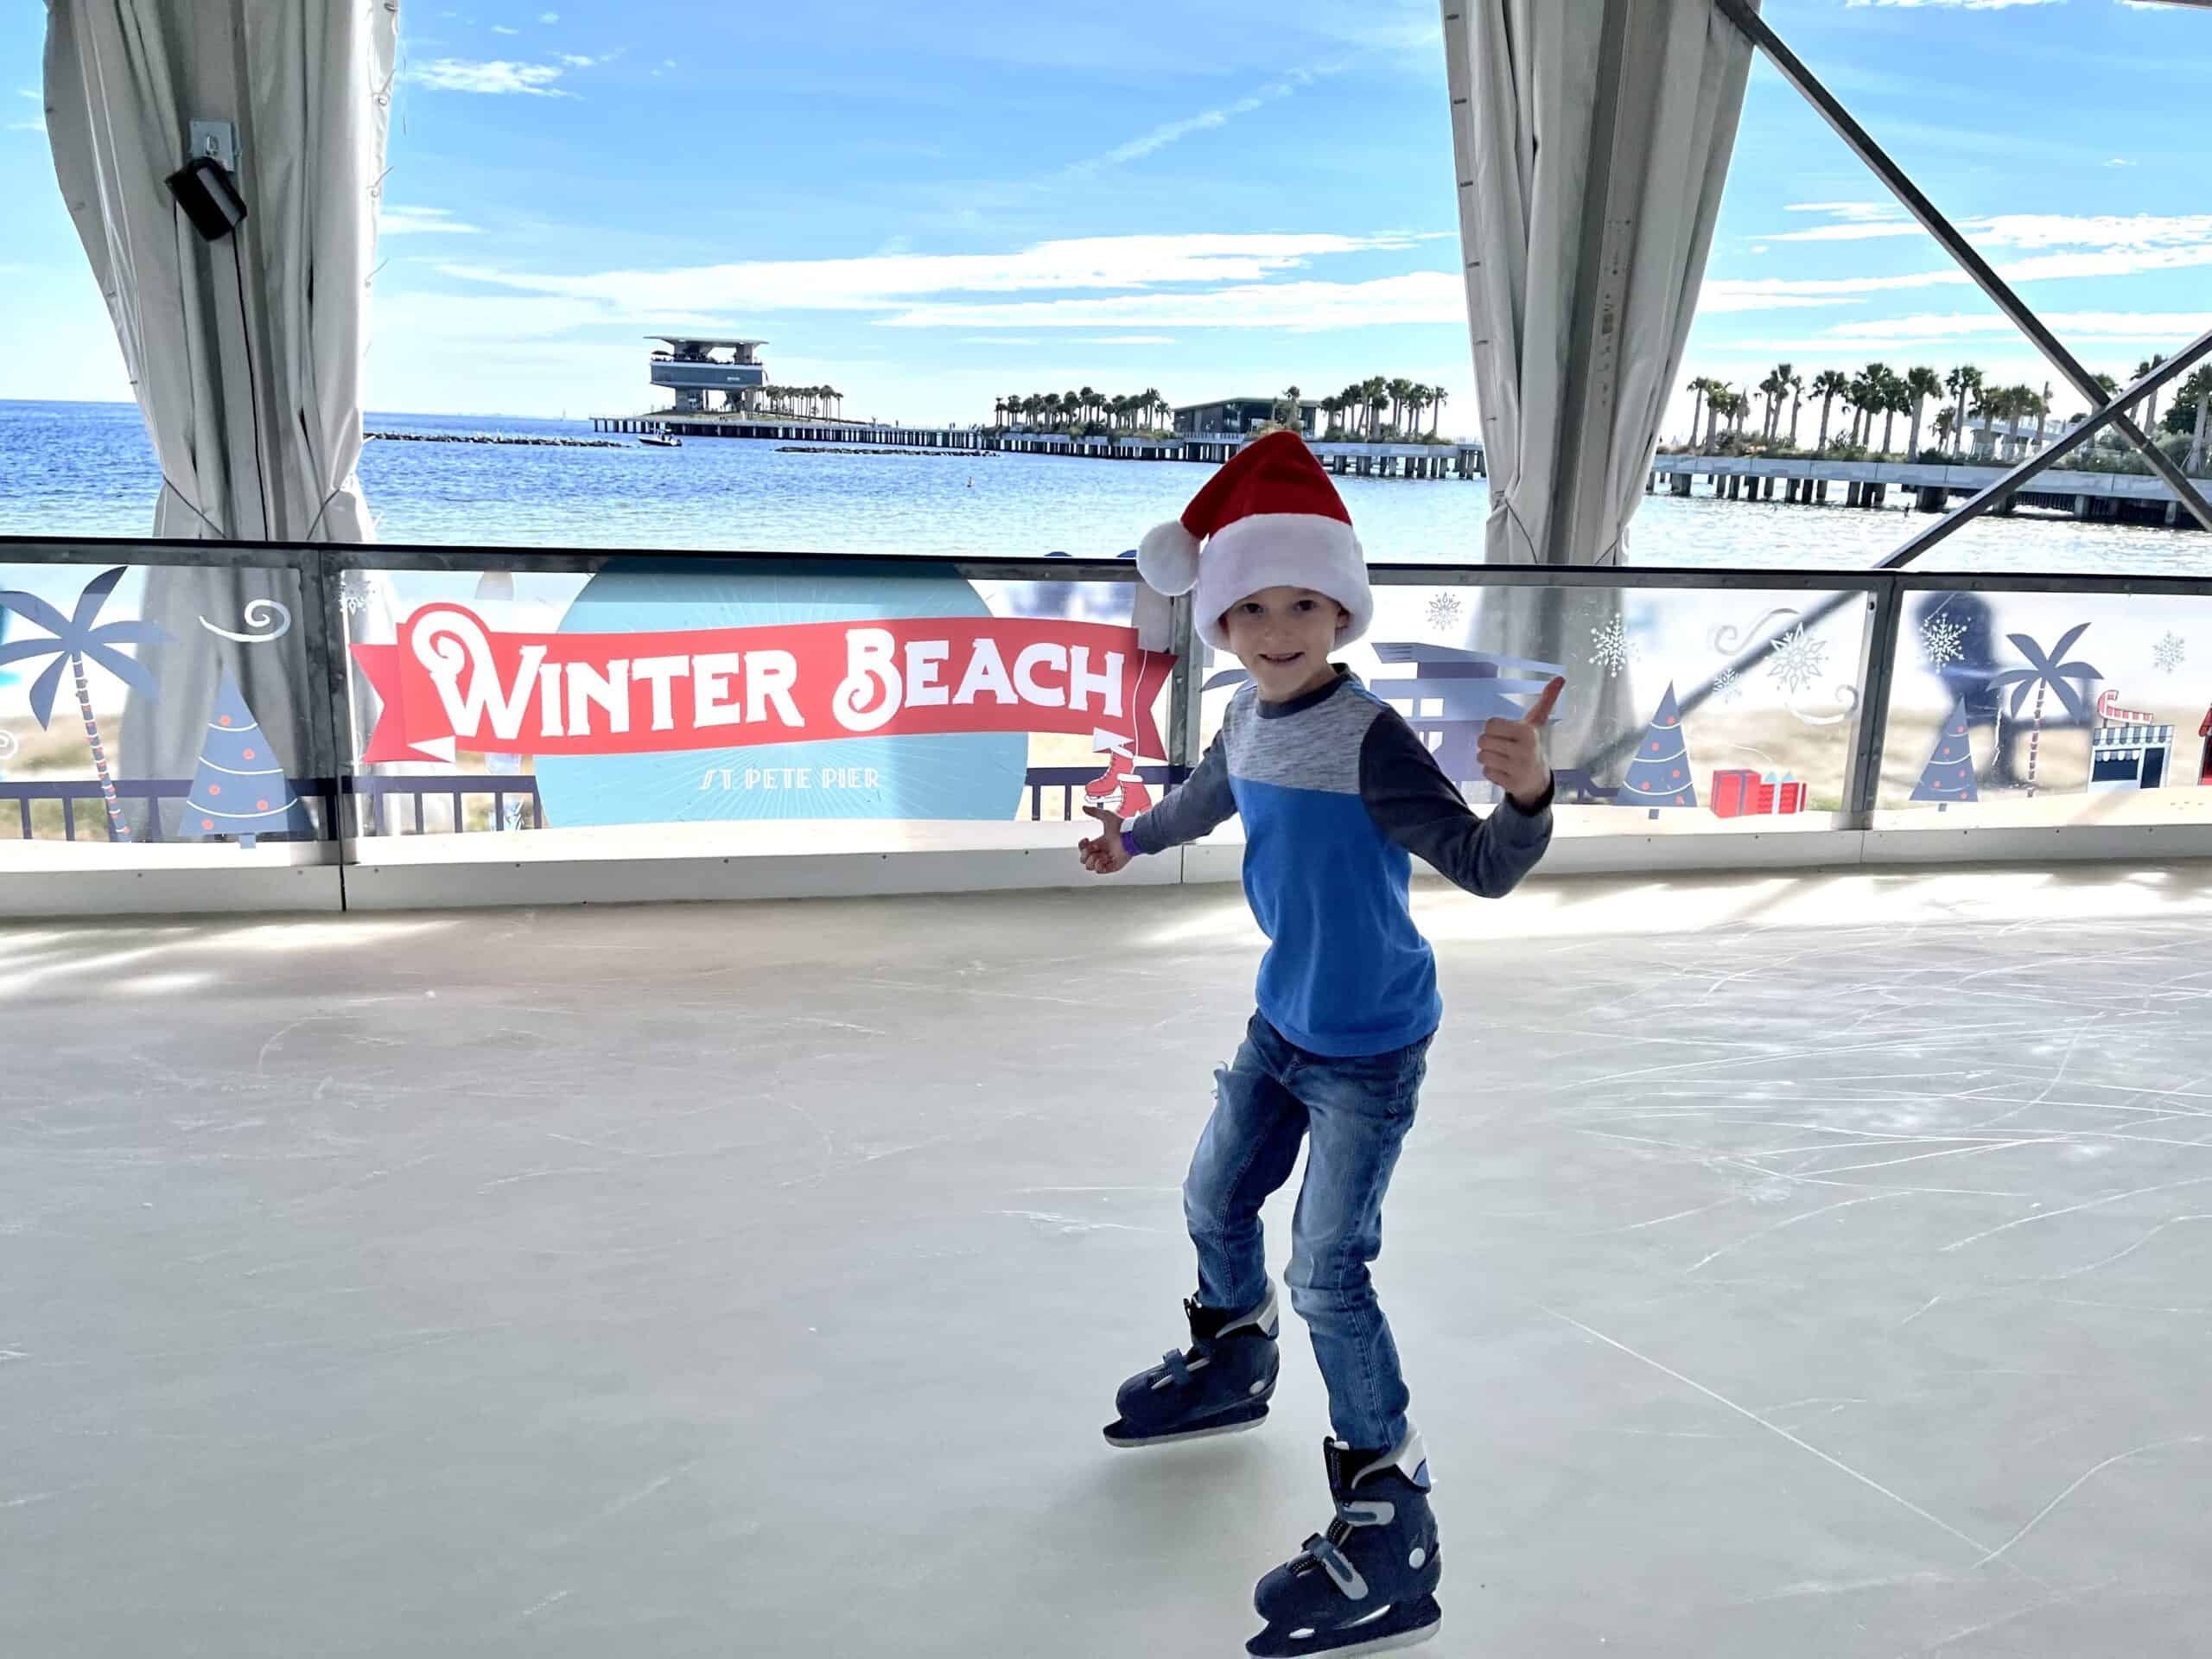 Winter Beach debuts at The St. Pete Pier!